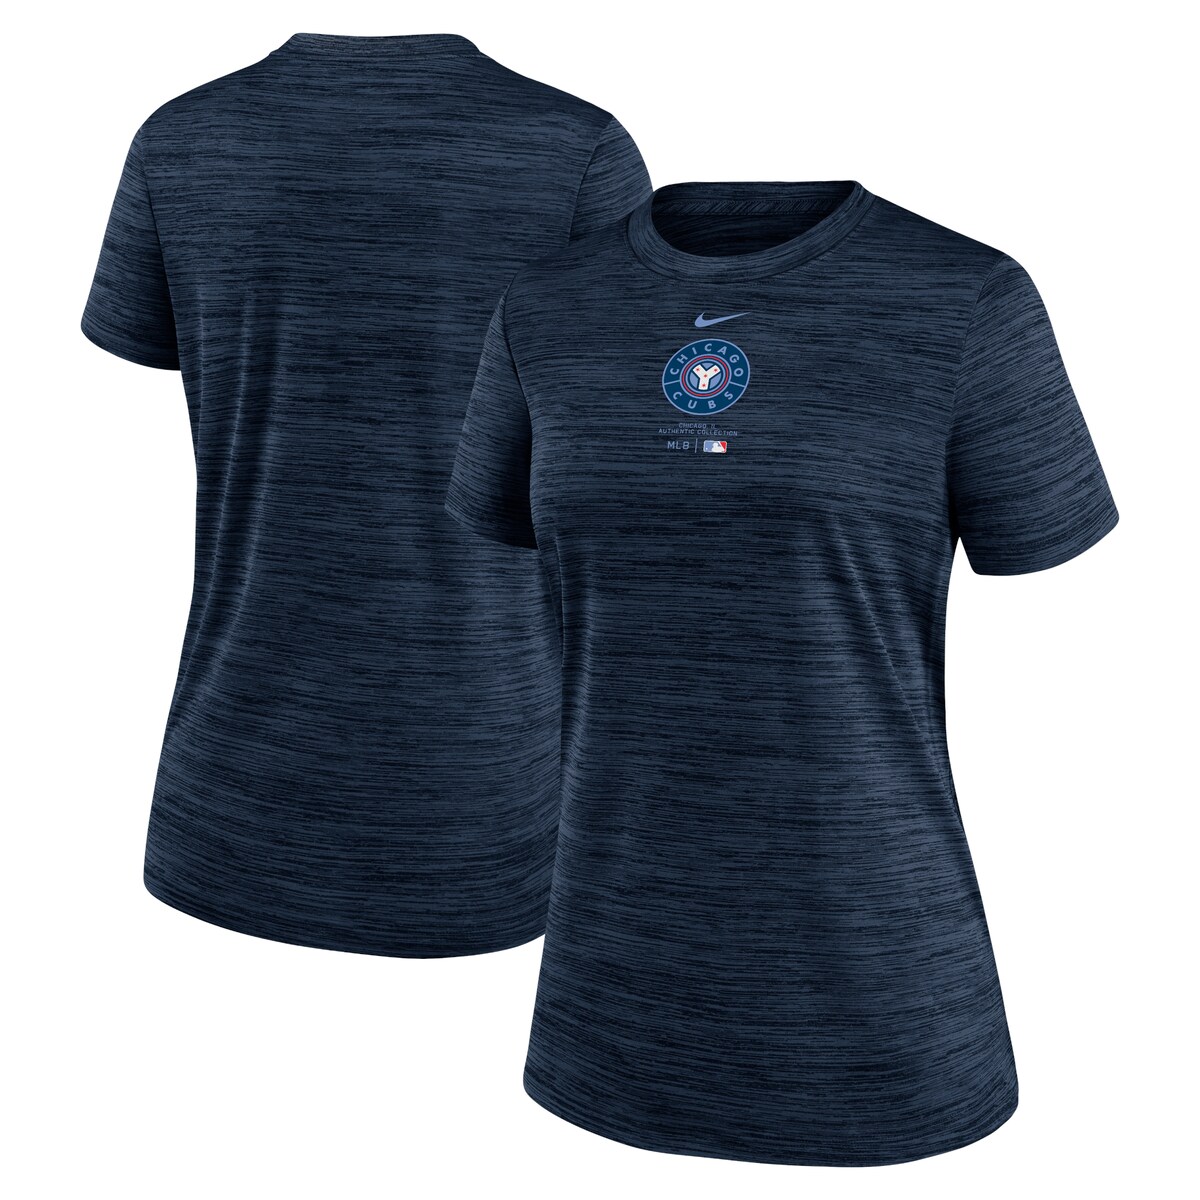 MLB JuX TVc Nike iCL fB[X lCr[ (Women's Nike City Connect Practice Velocity Tee)